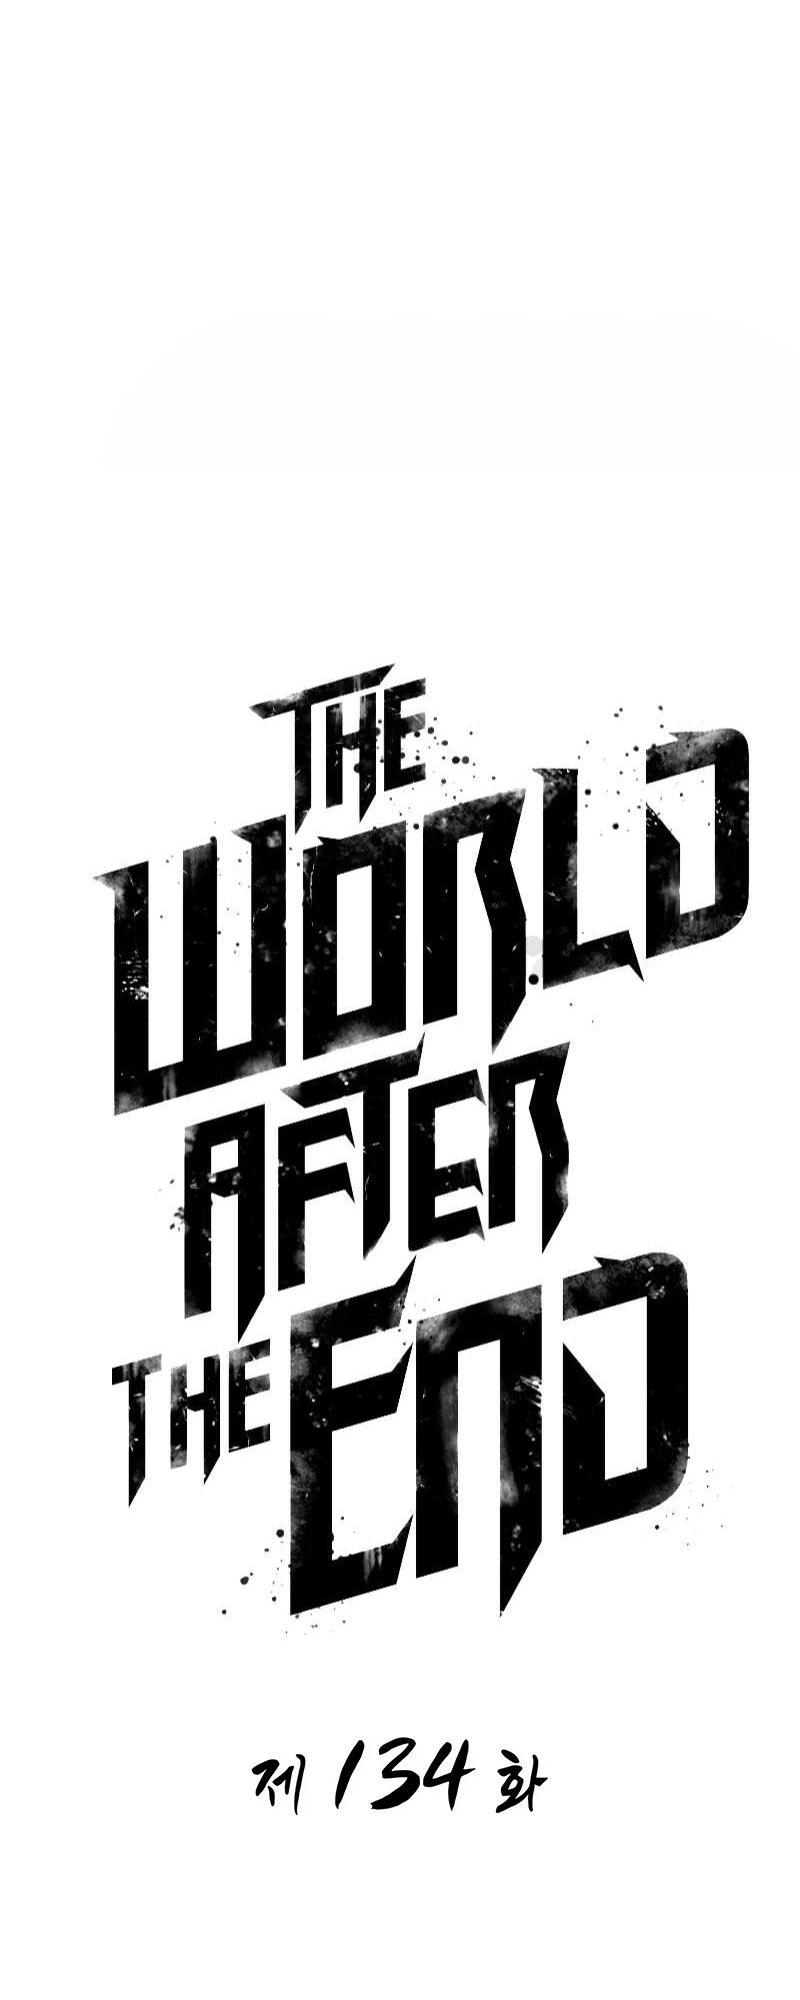 The world after the End 134 6 07 25670025